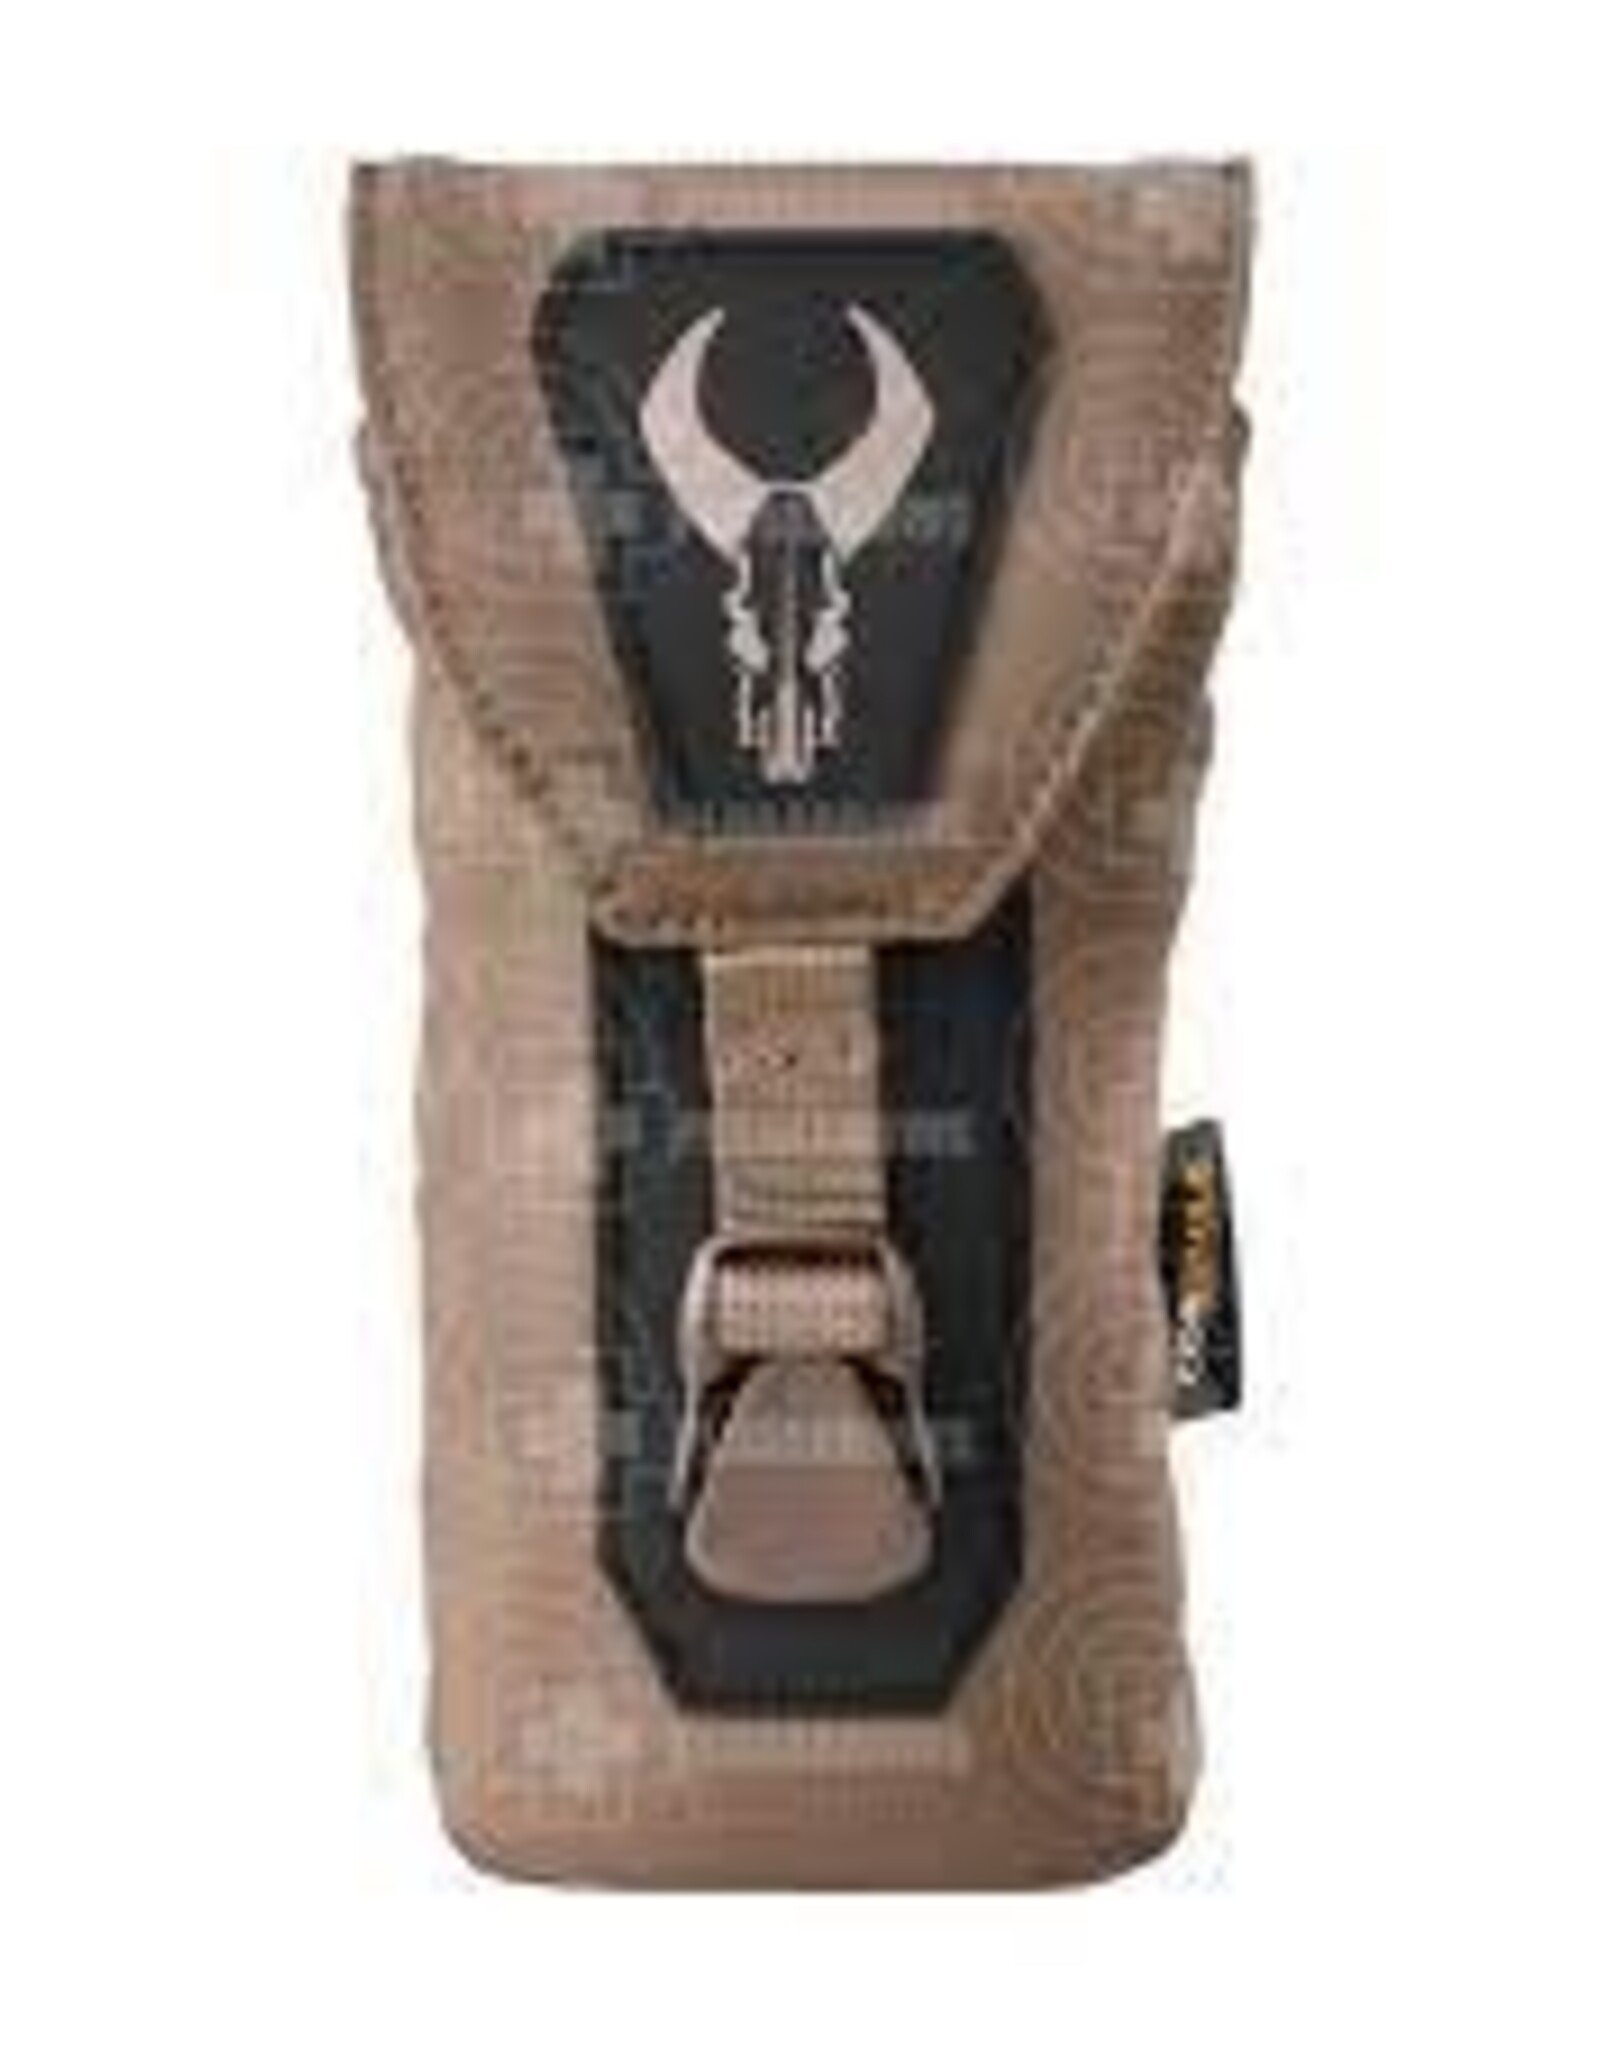 Badlands Everything Pouch Mud